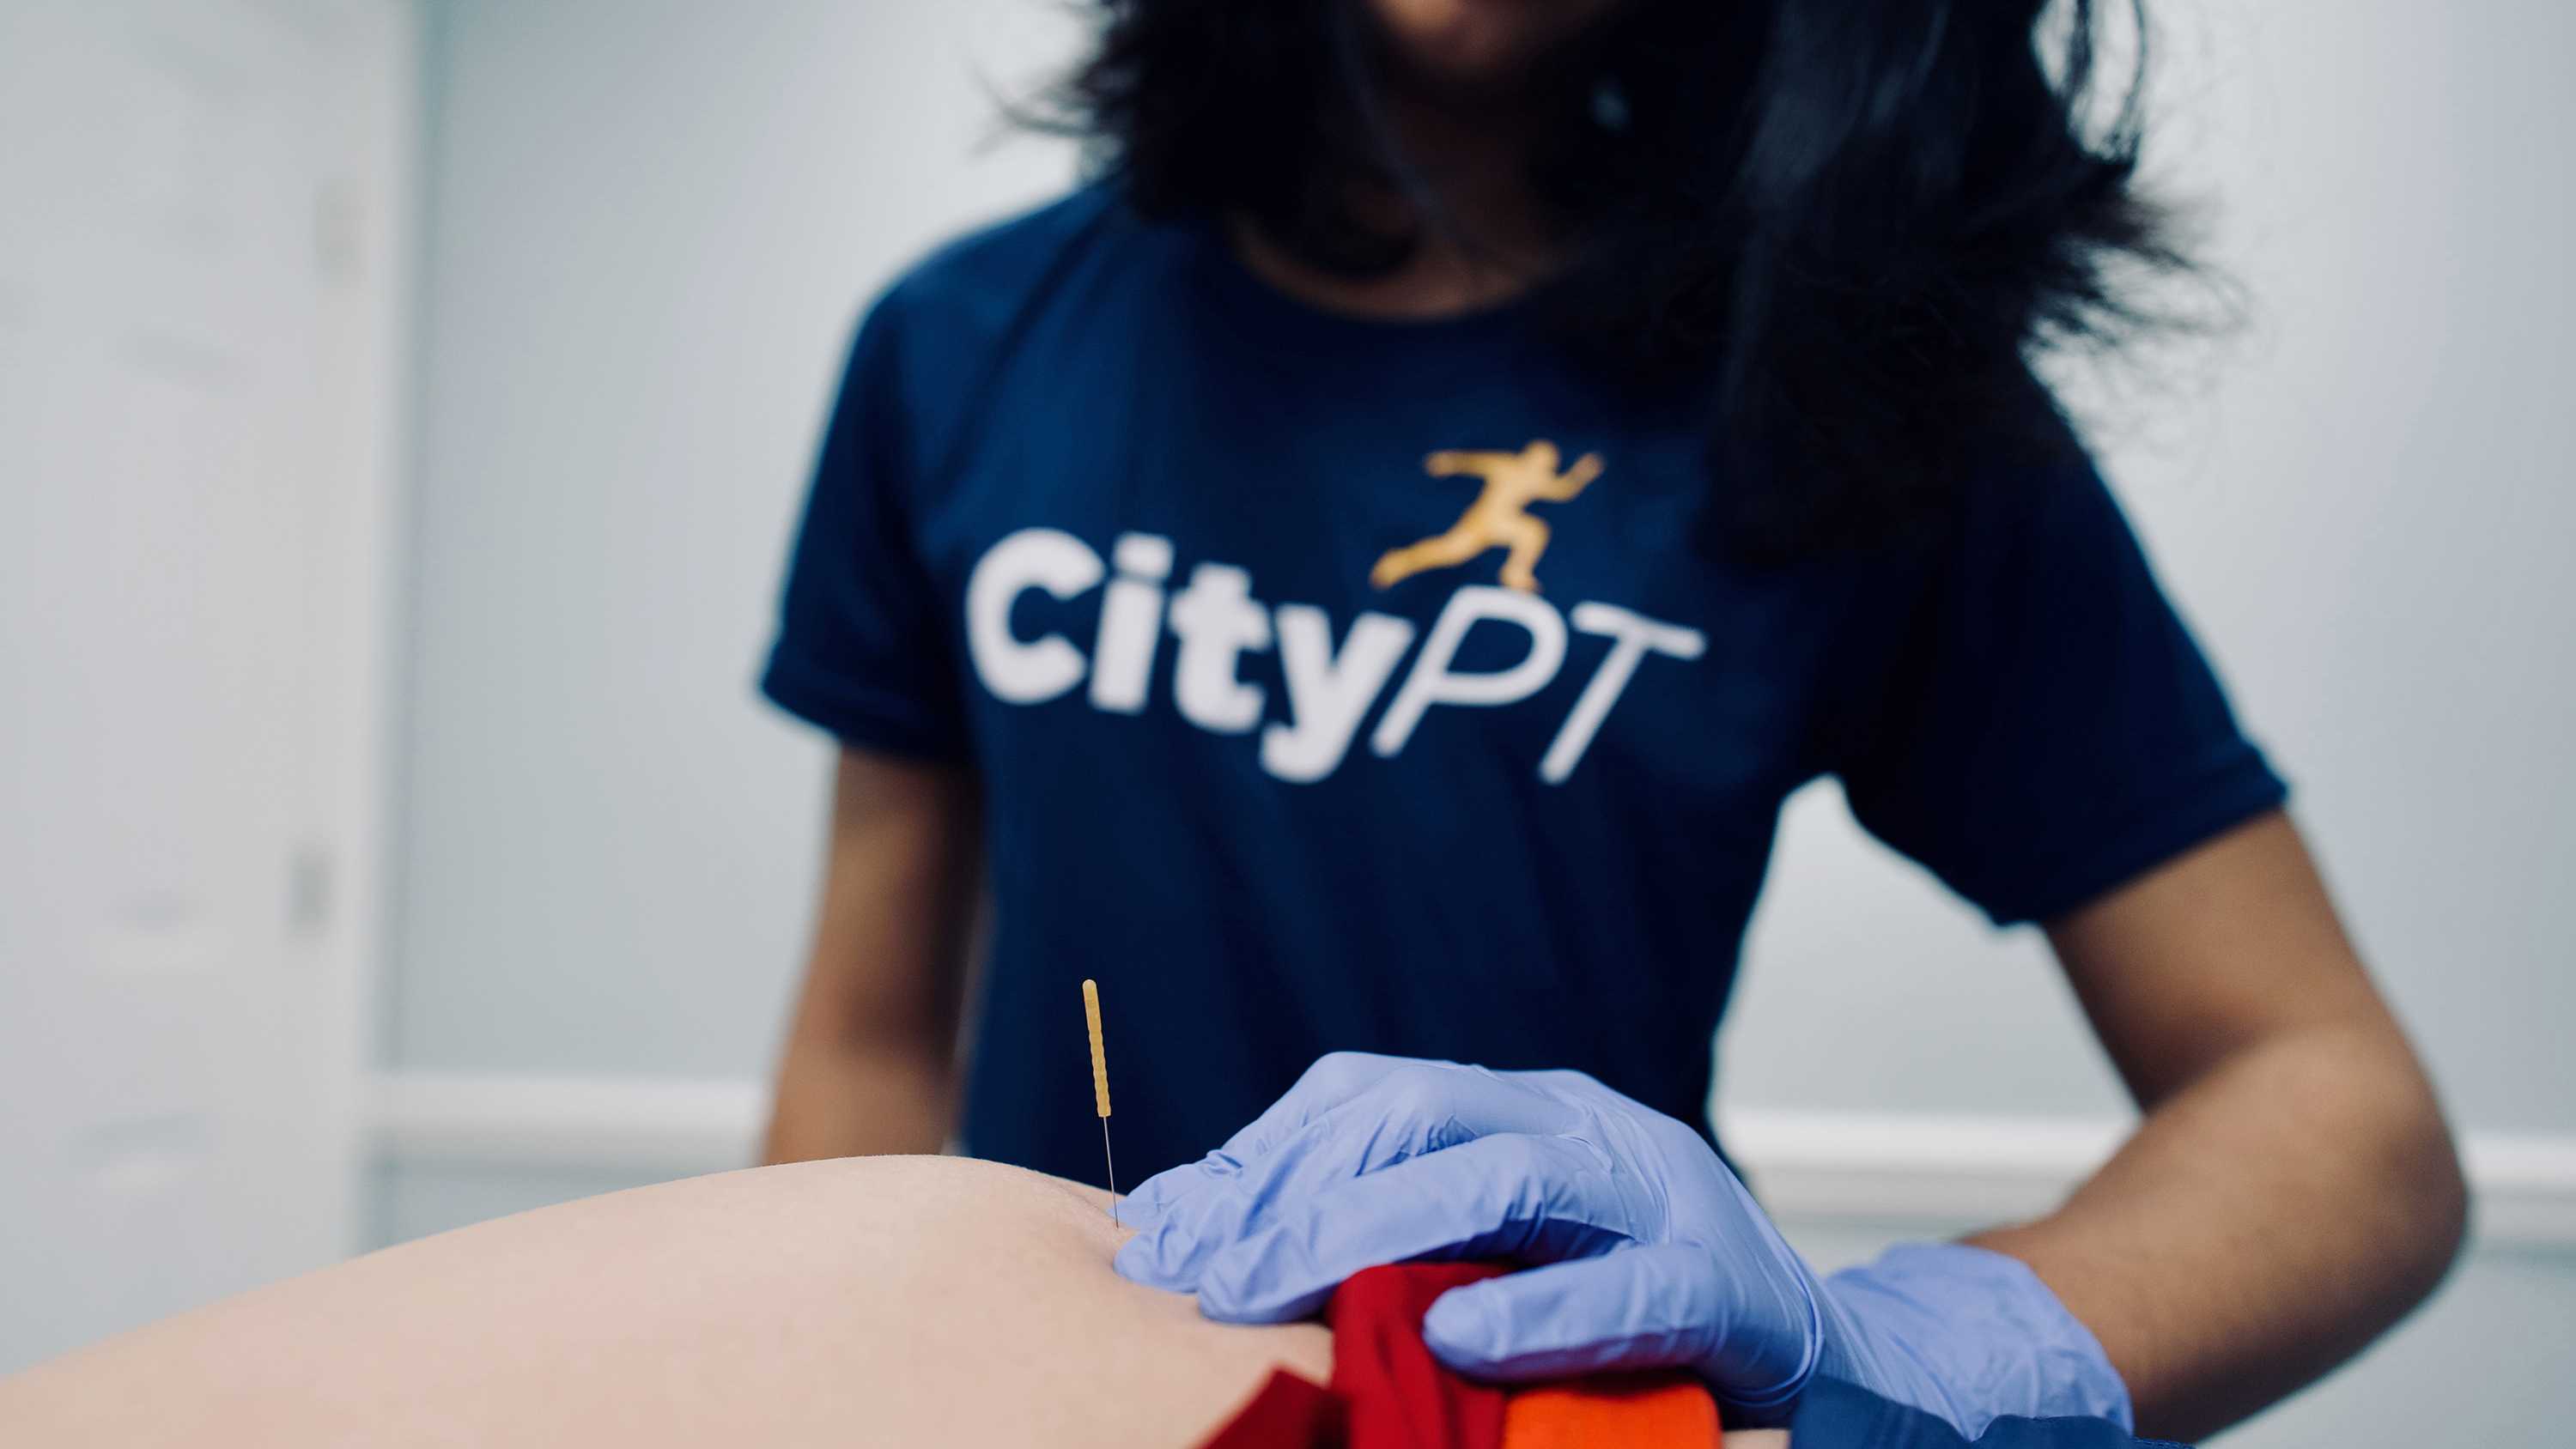 Dry needling treatment in hip